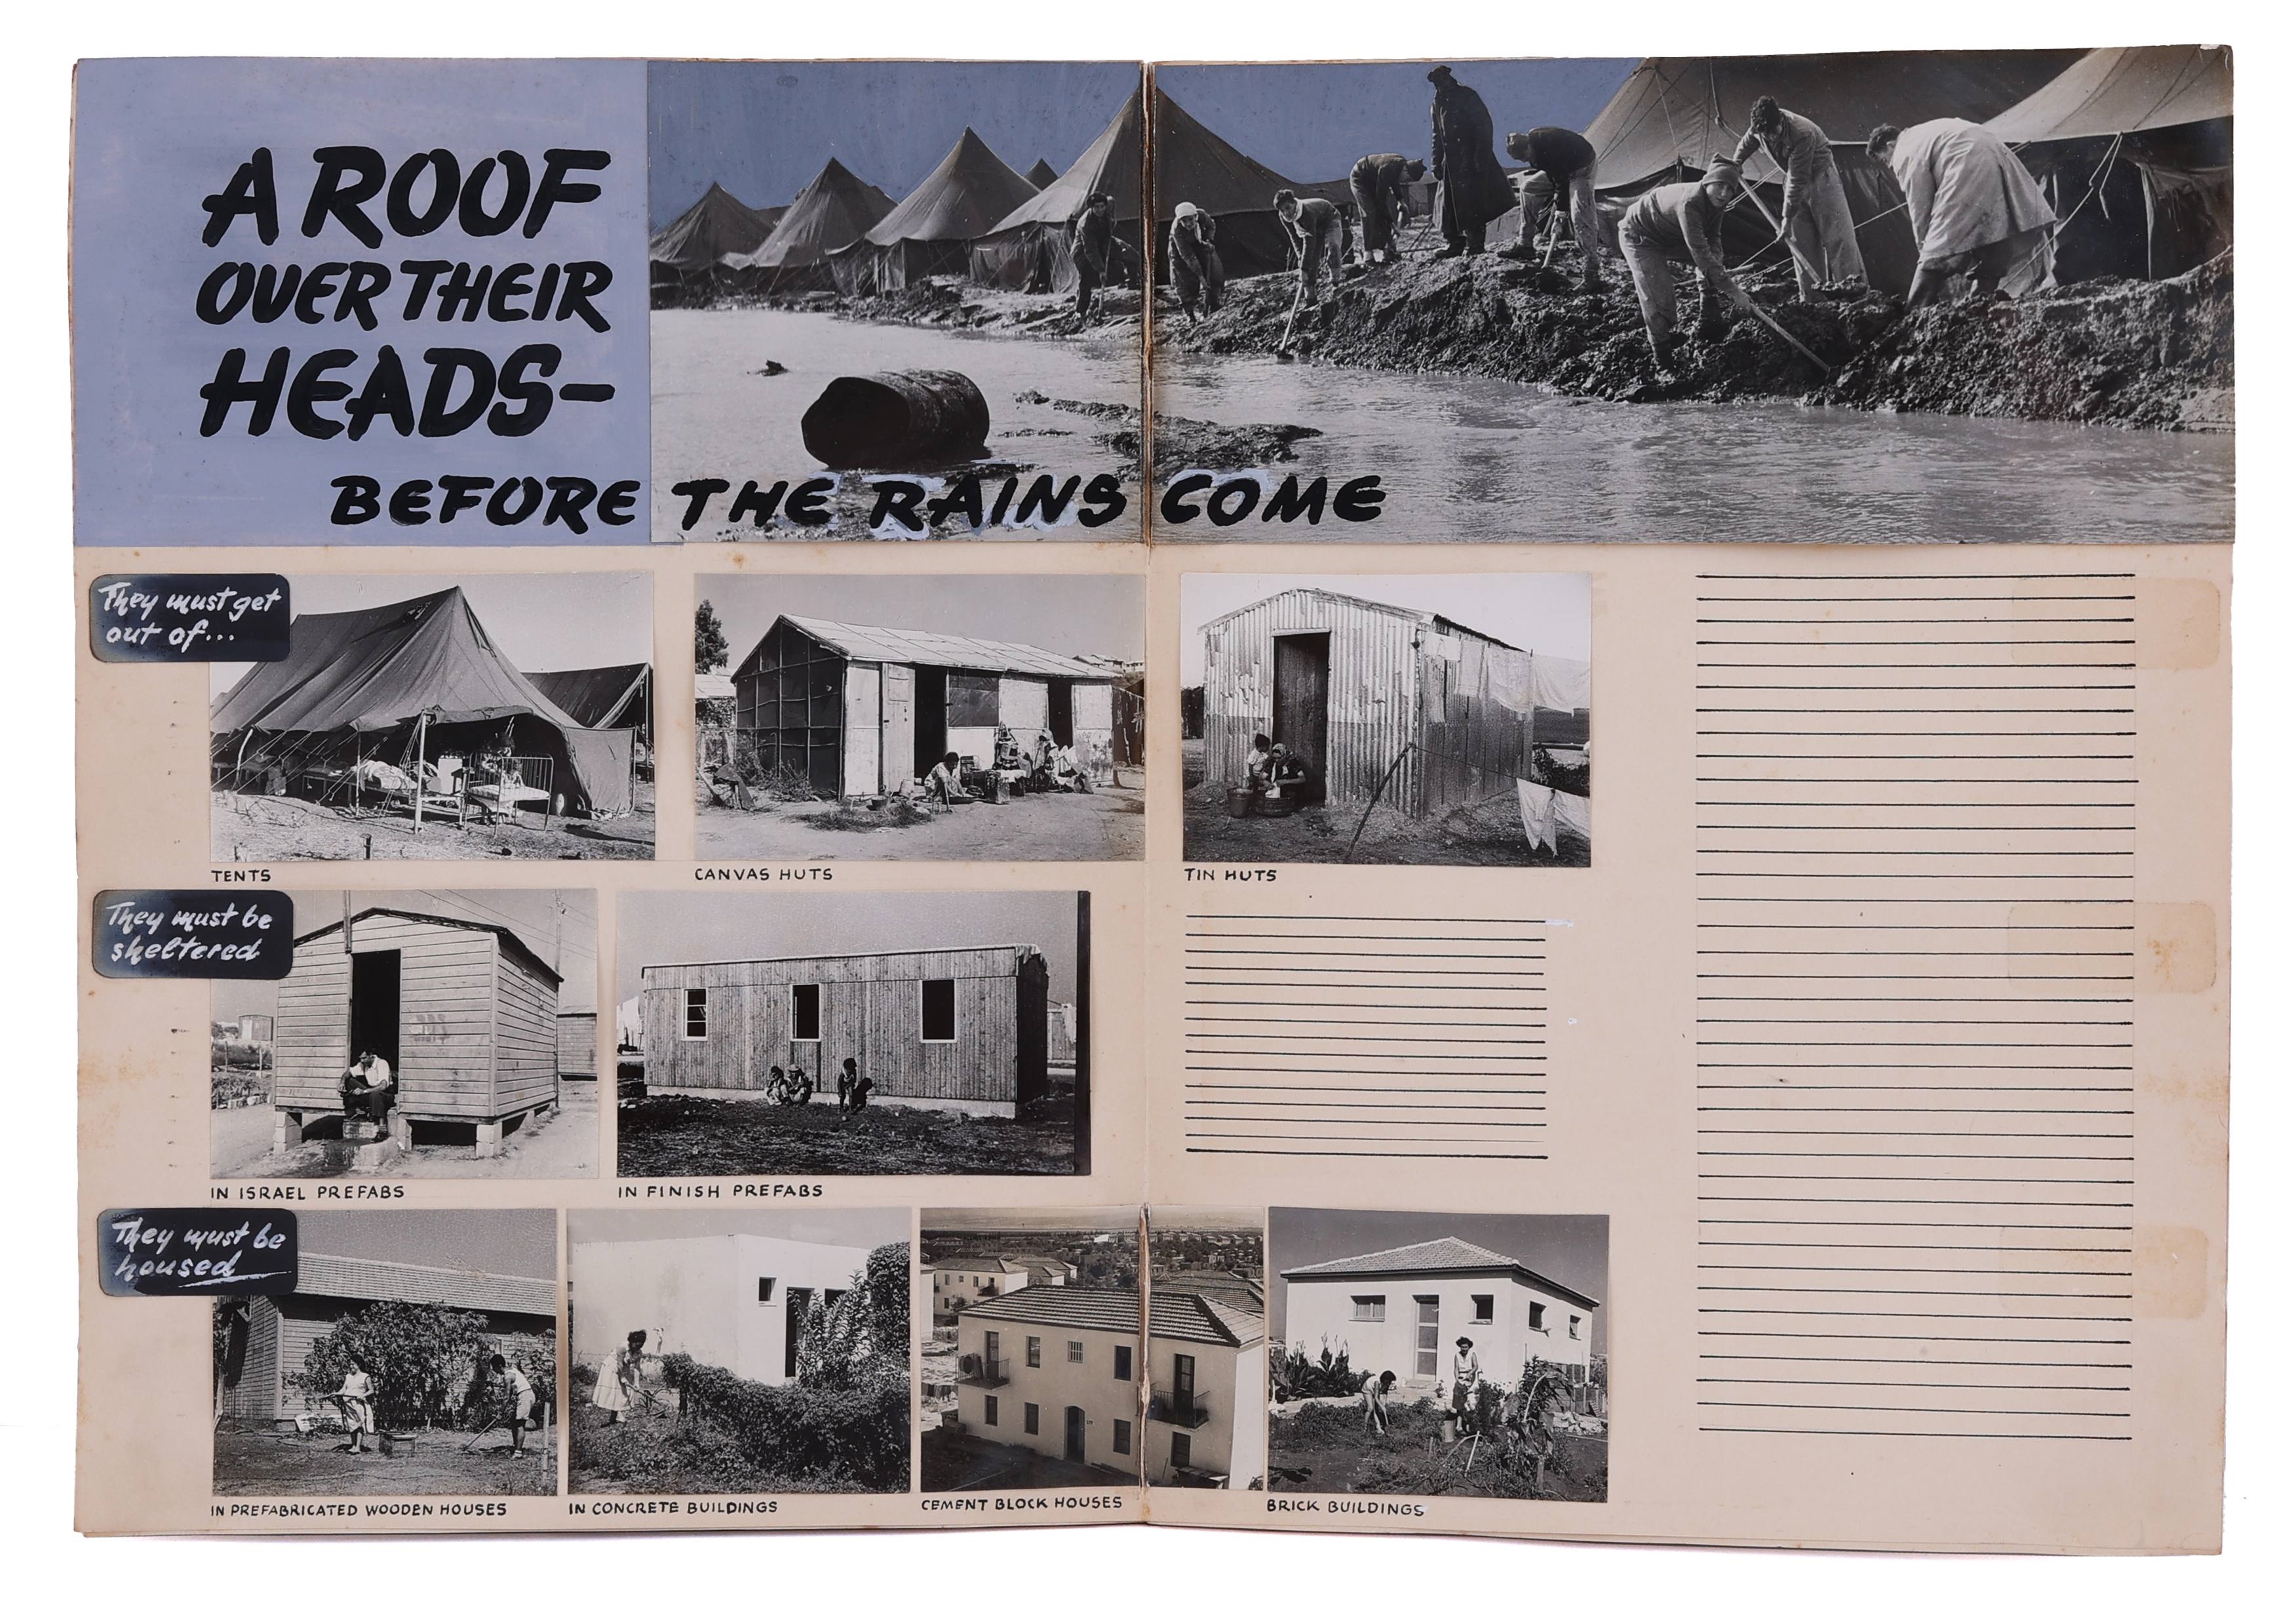 New immigrants in "ma'abarot" (transit camps) and absorption camps - Zoltan Kluger